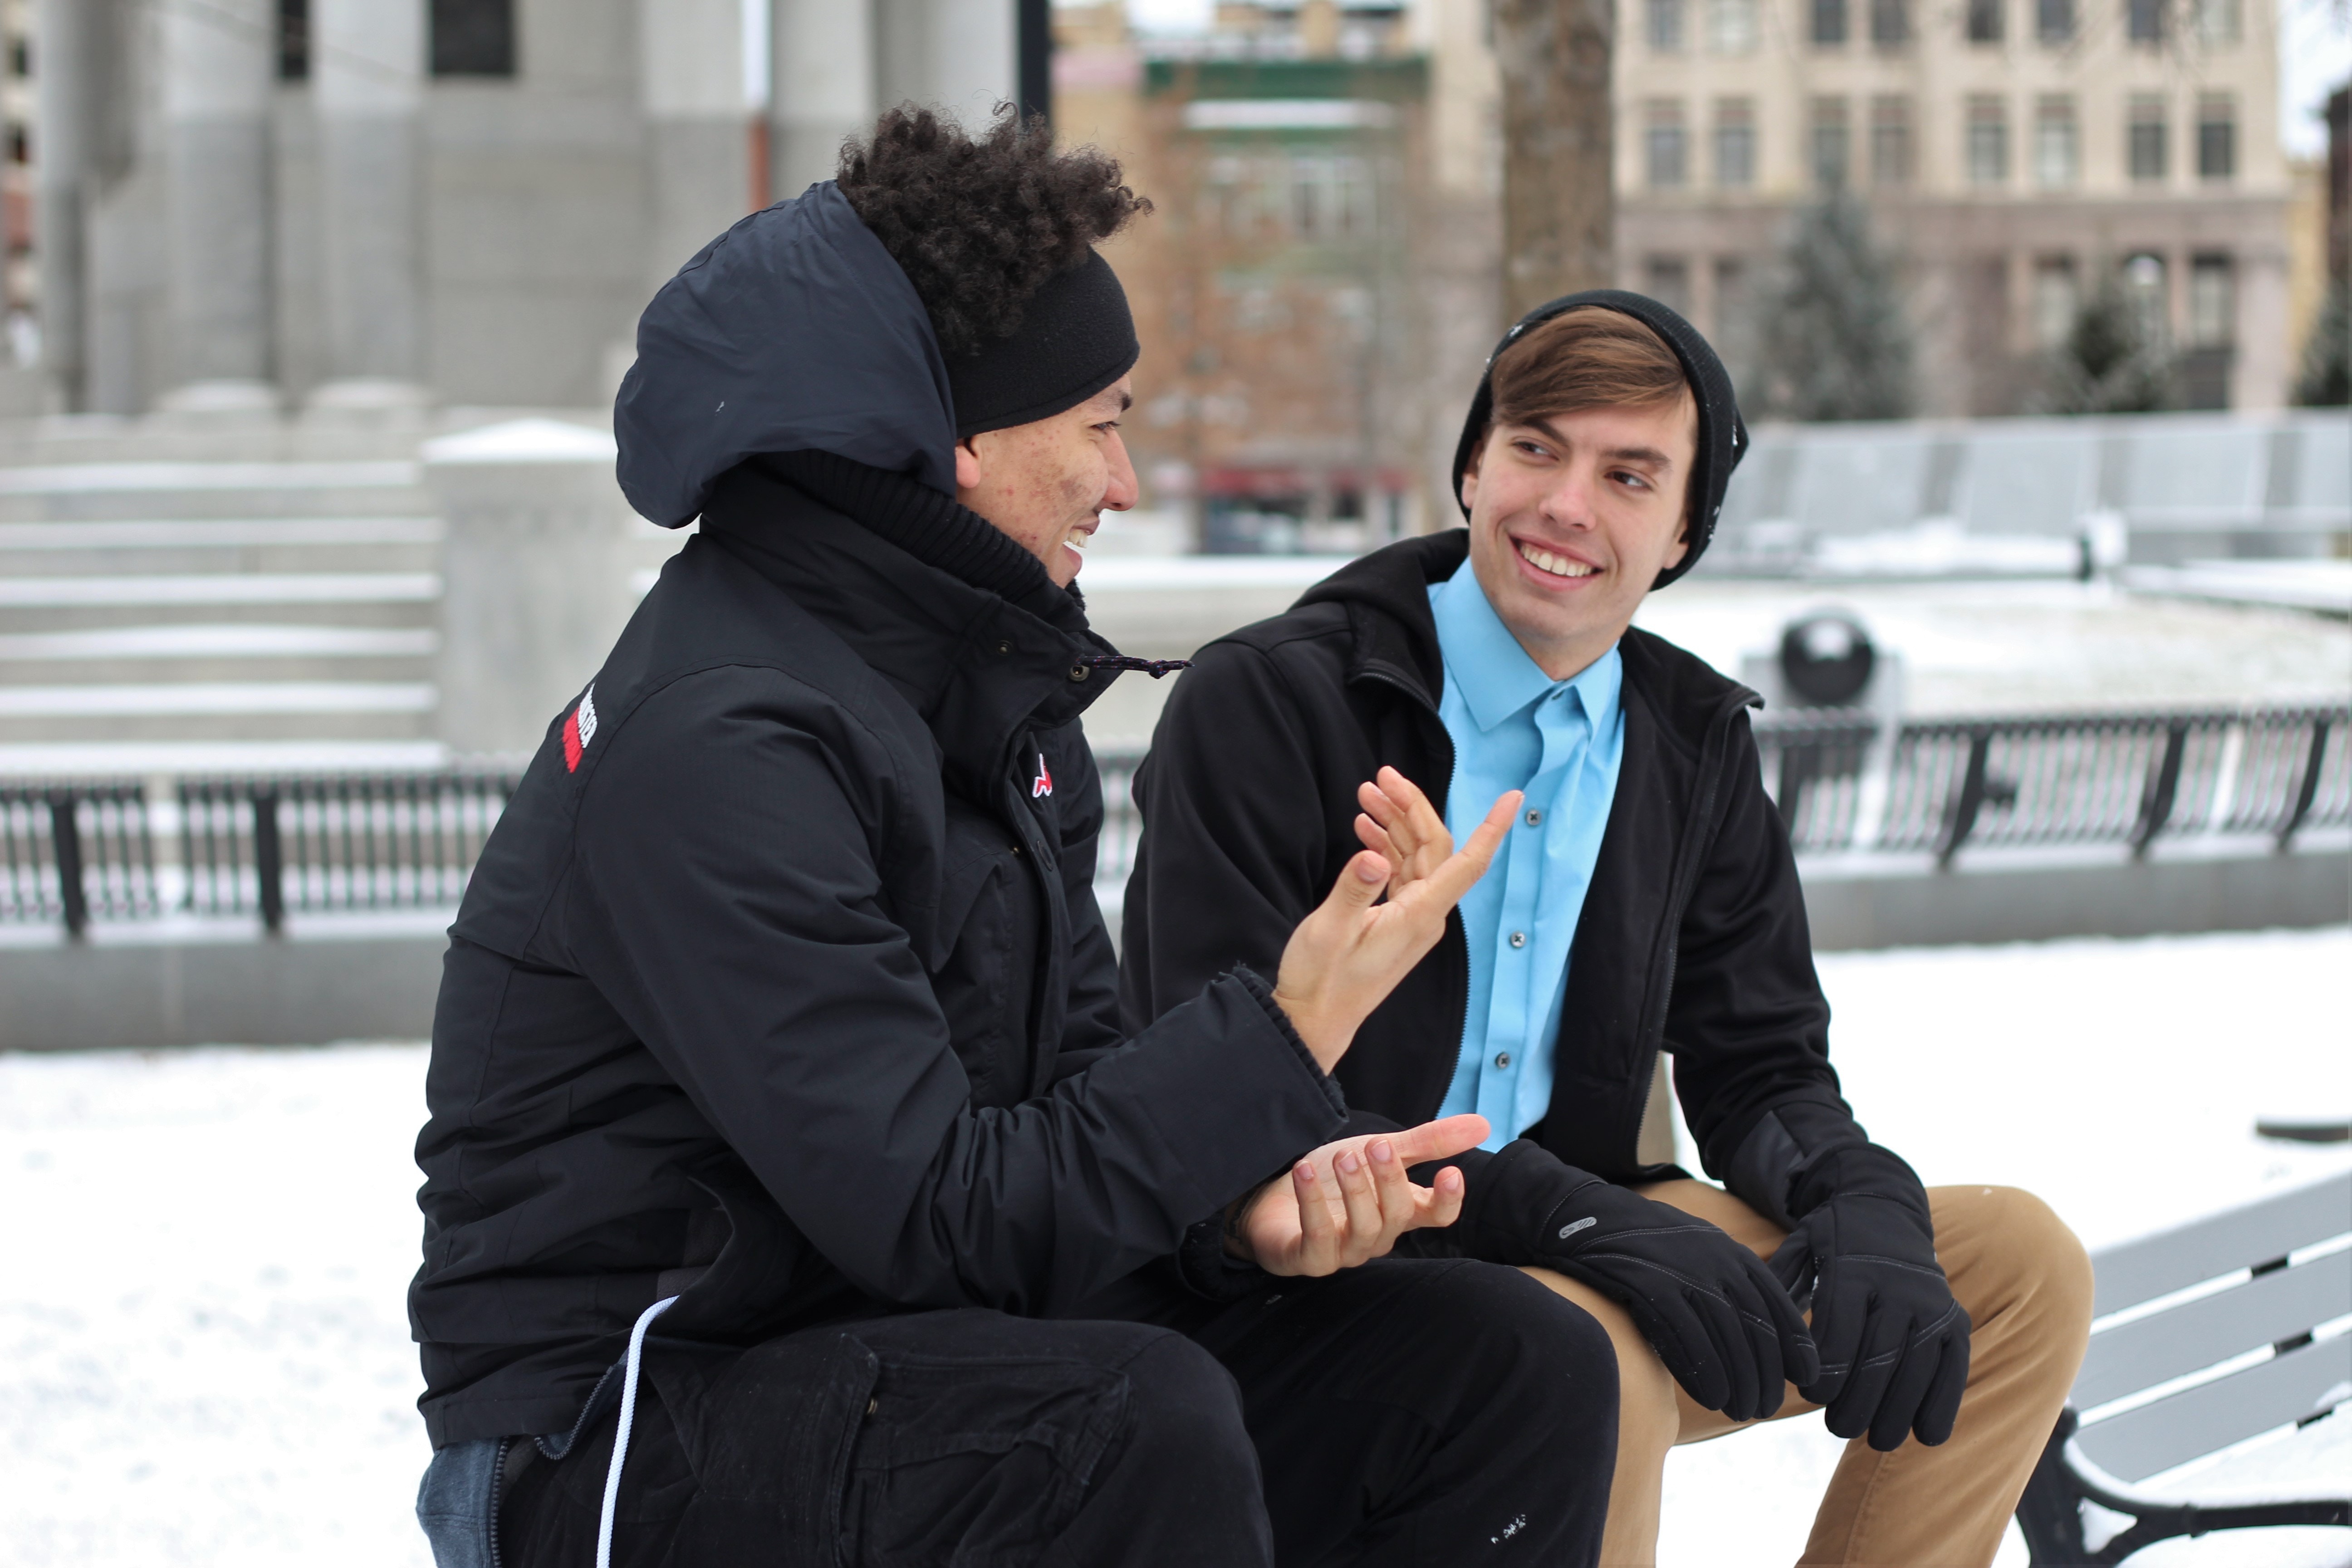 Two men sitting on a bench and chatting.